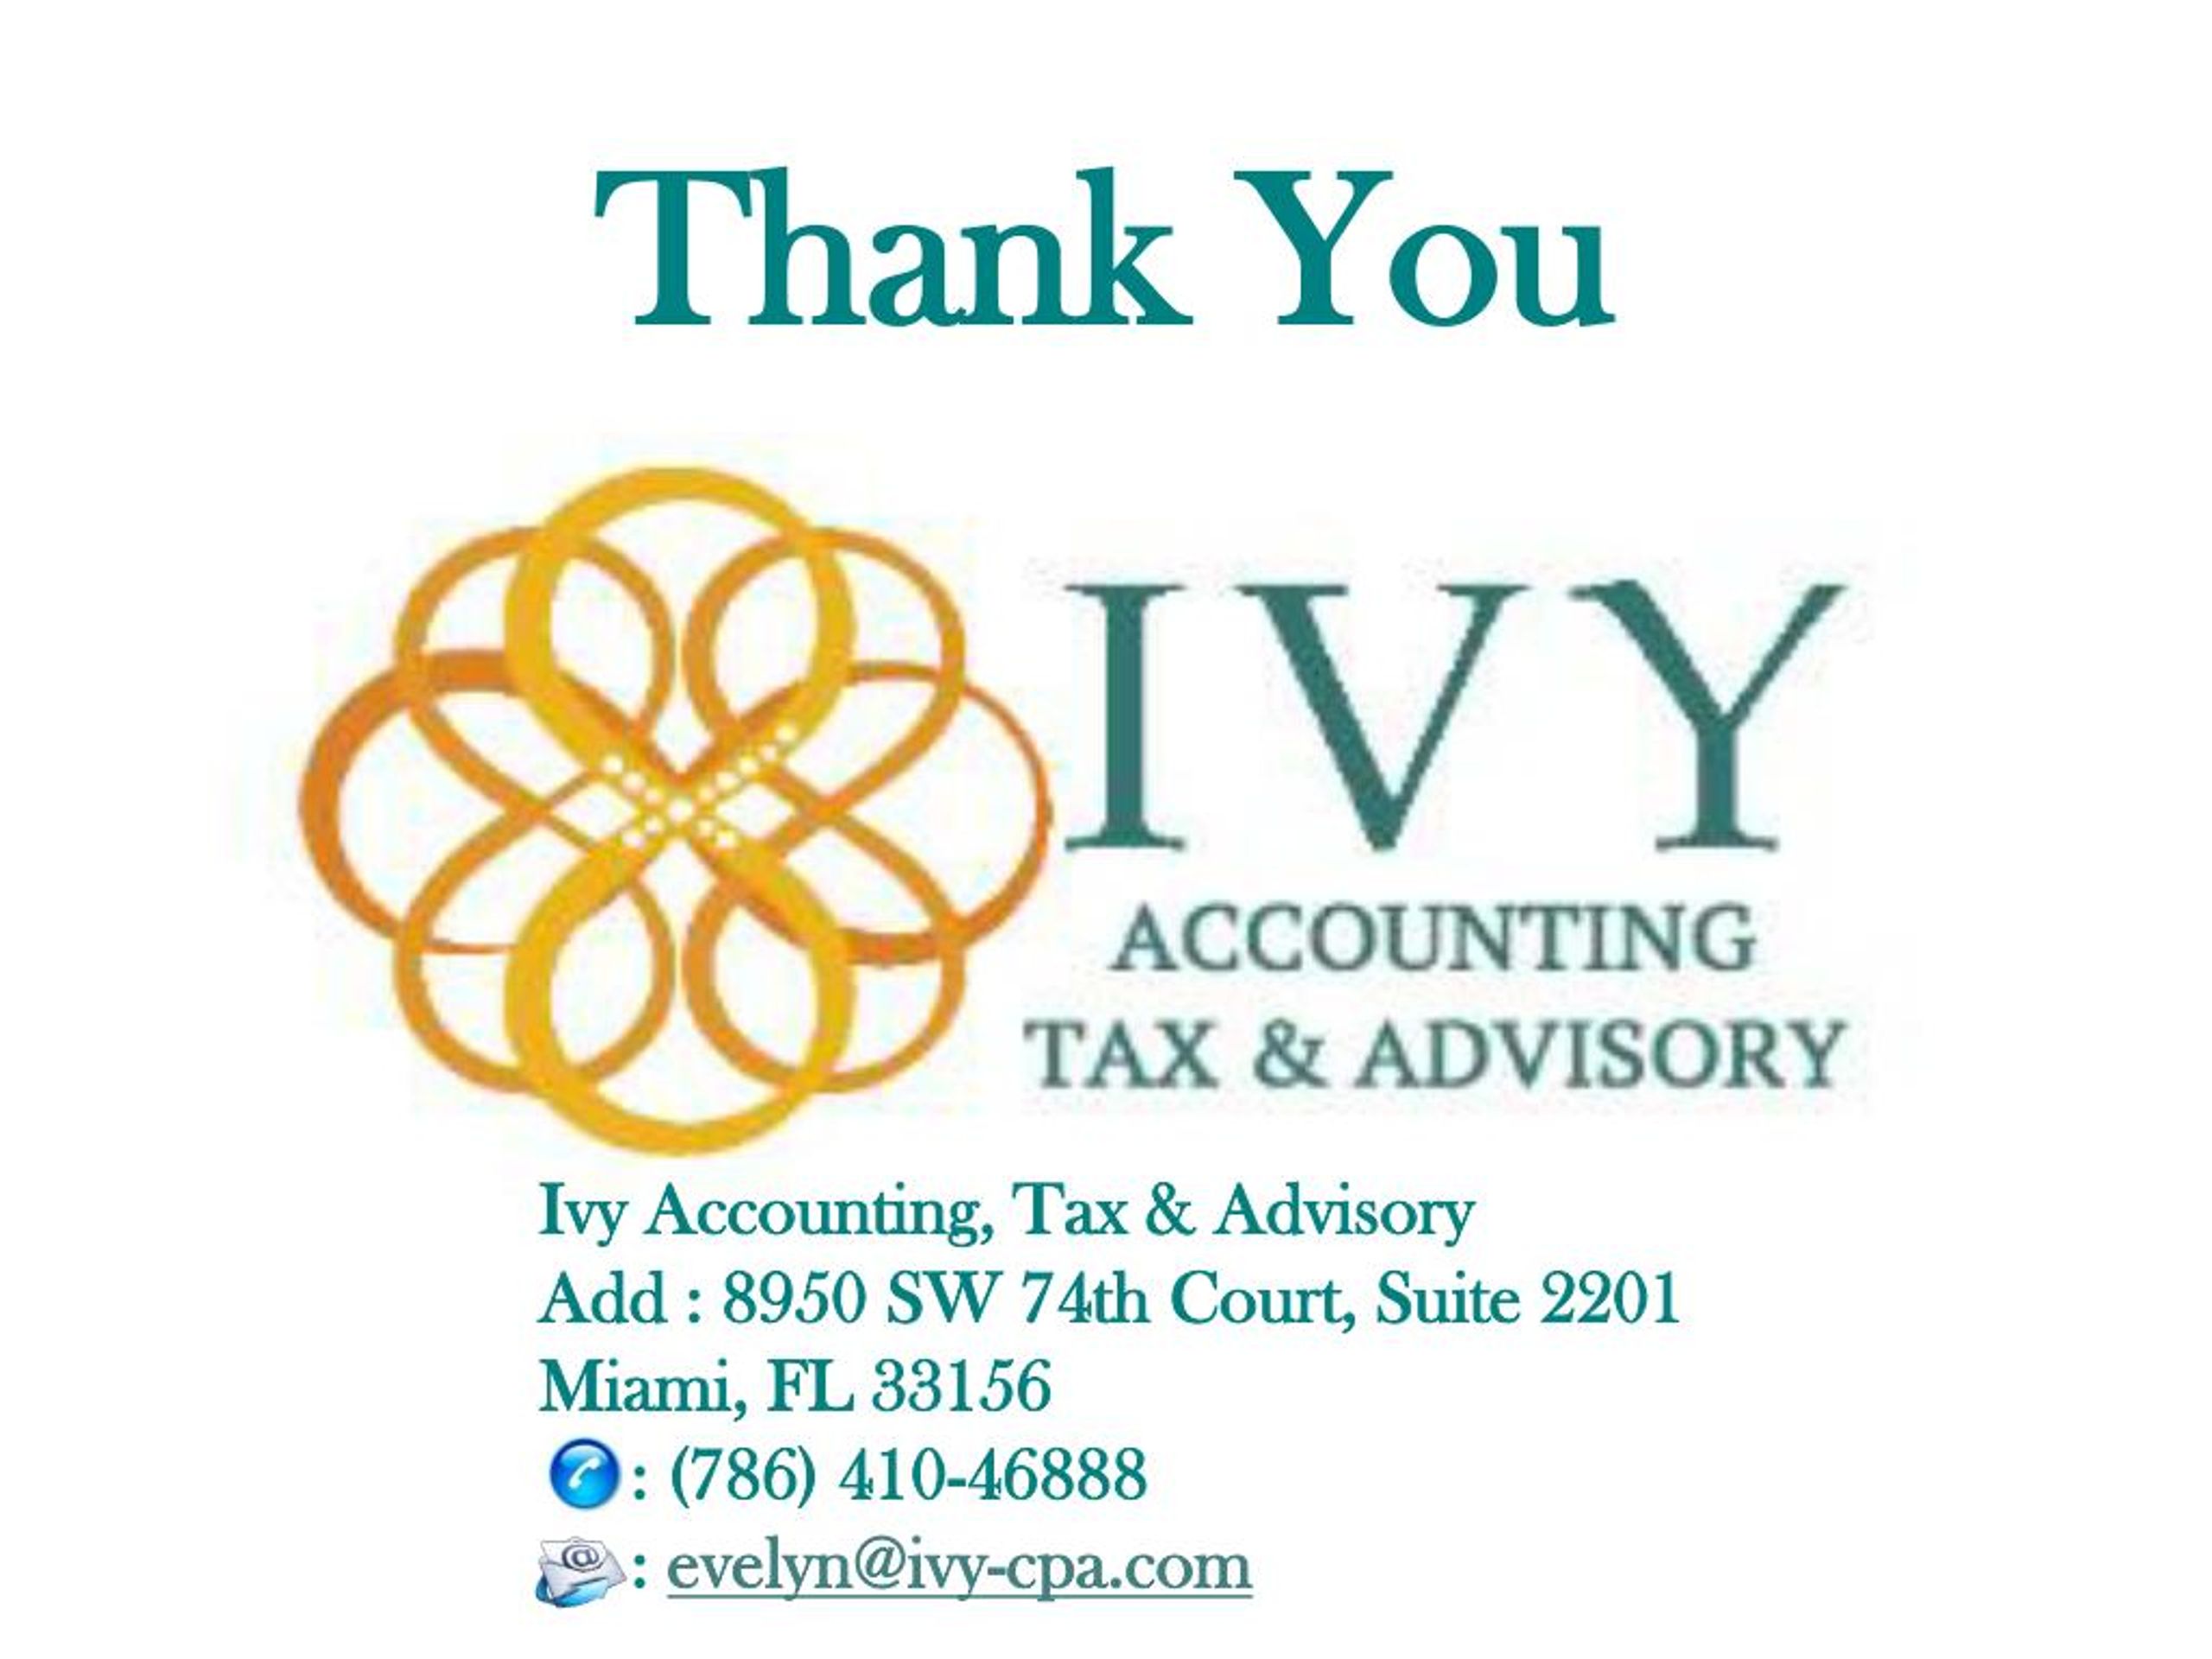 PPT Miami CPA offering Tax Preparation, Accounting and Planning from Top Chinese preparers